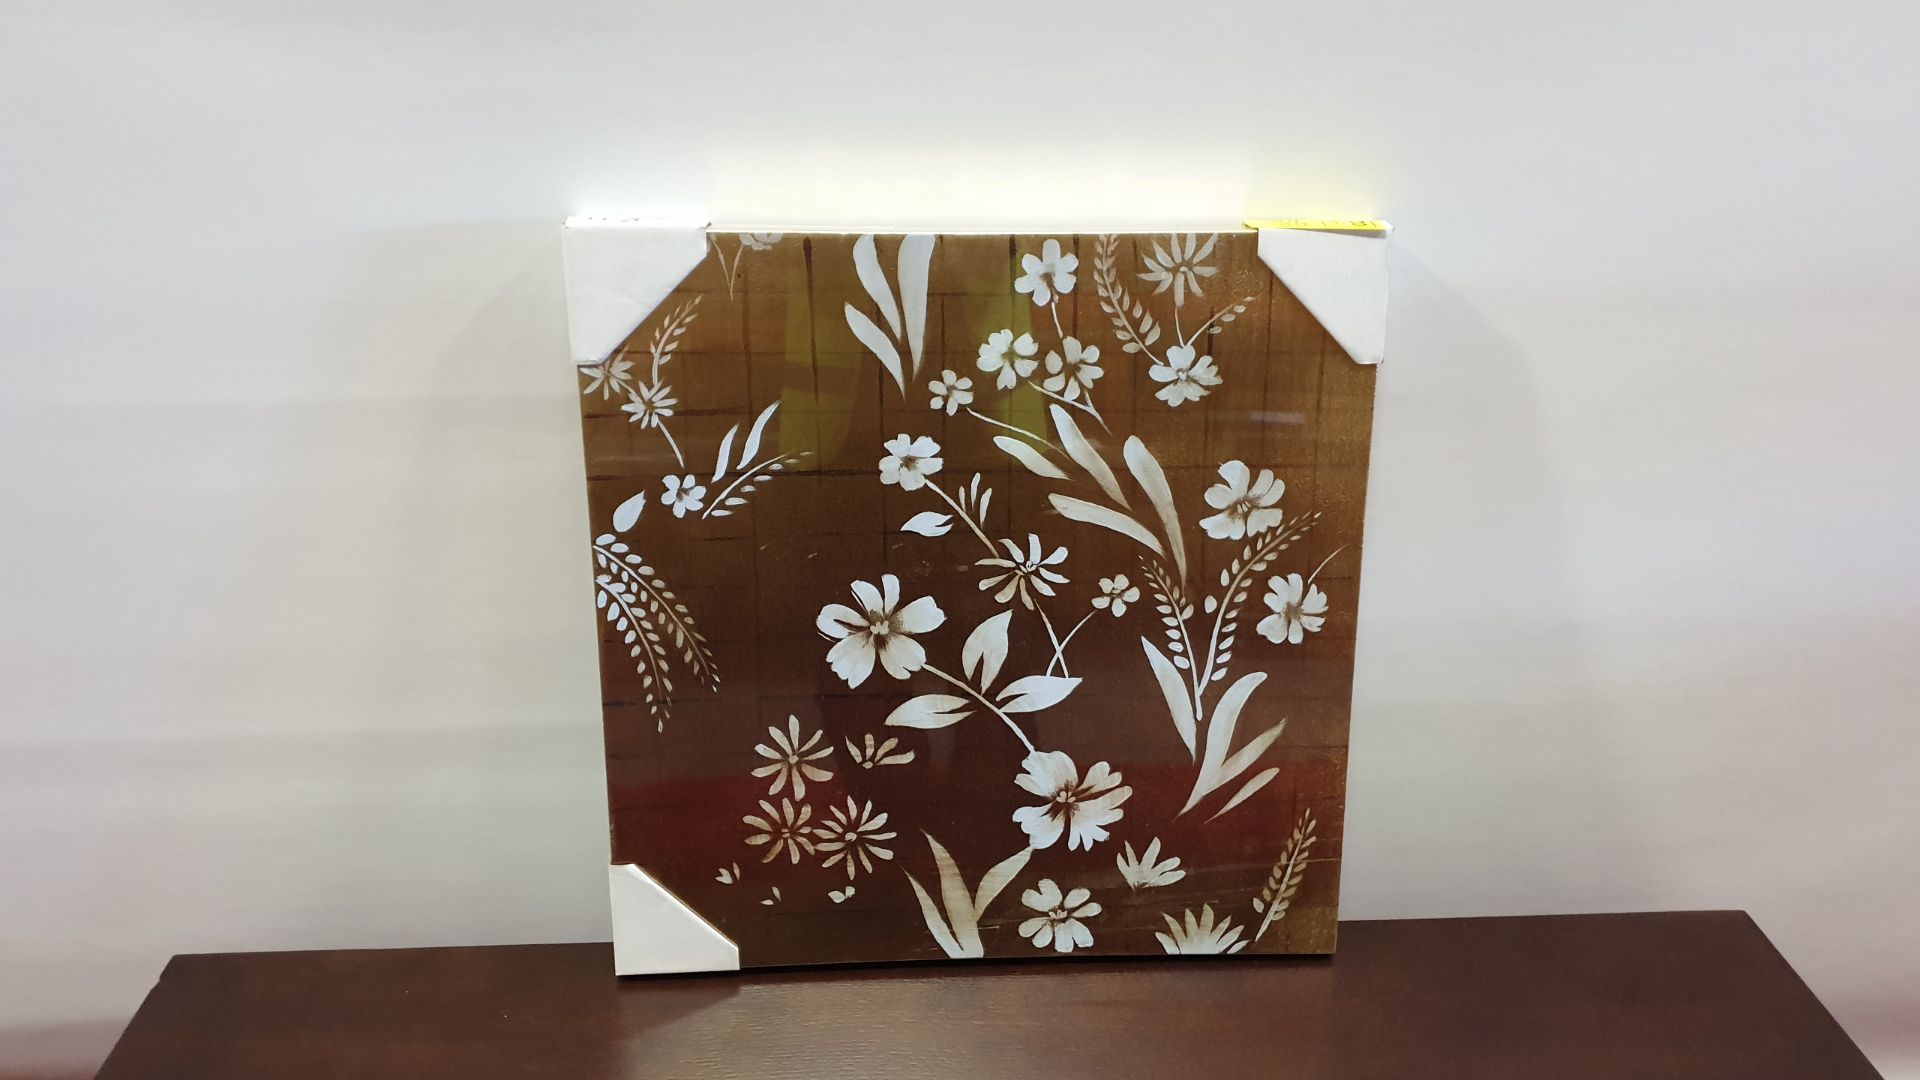 CANVAS WHITE AND GOLD FLORAL PICTURE SIZE 610 X 610 X 40 RRP £85